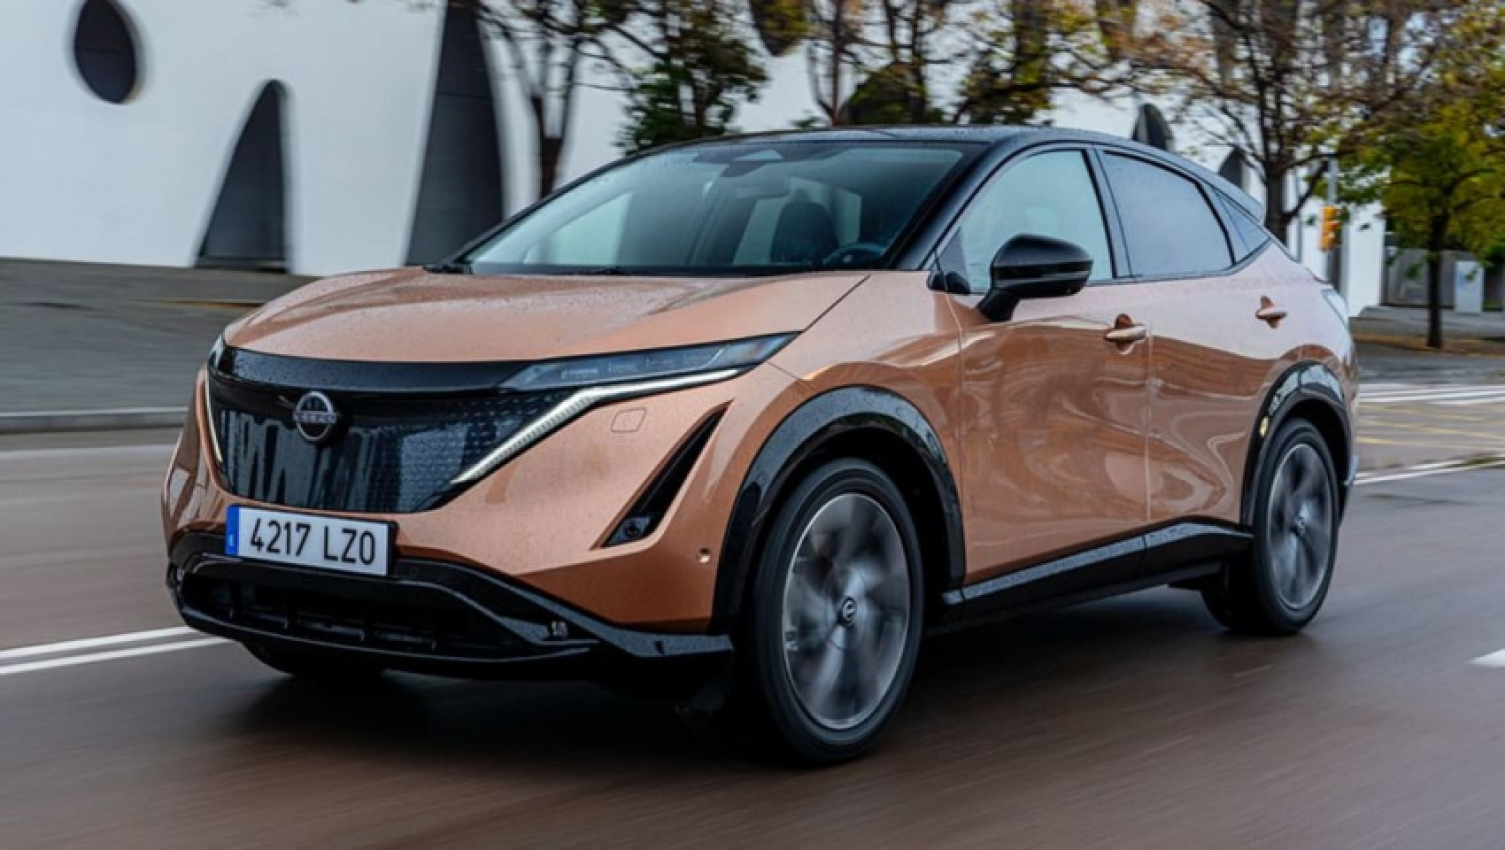 autos, cars, hyundai, kia, nissan, toyota, electric, electric cars, hyundai ioniq, industry news, nissan ariya, nissan news, nissan suv range, showroom news, should nissan offer the hyundai ioniq 5, kia ev6 and toyota bz4x-rivalling ariya electric car in australia, and at what price could you be expected to pay for one?